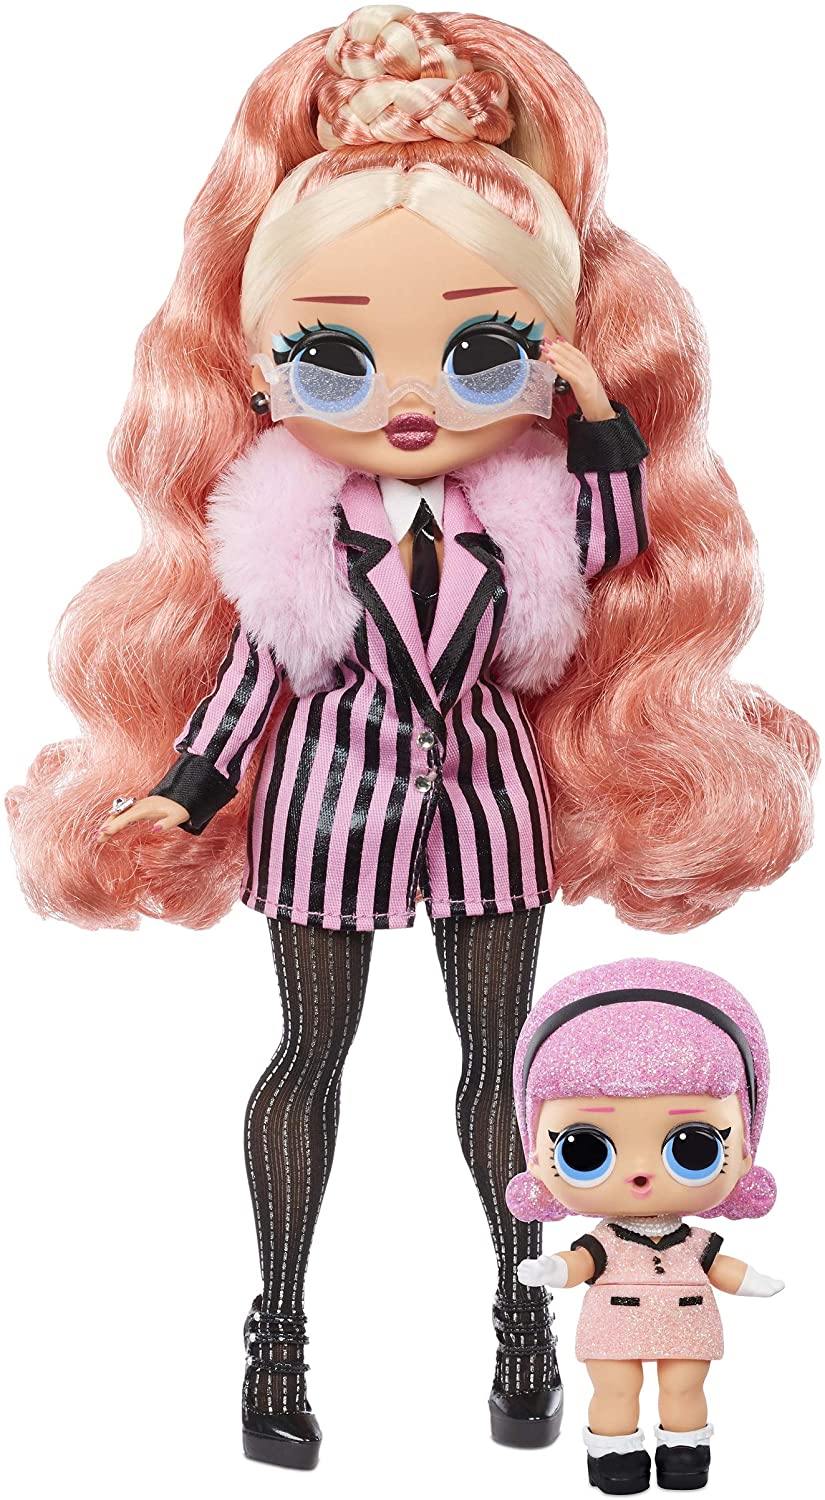 Lol Surprise OMG Winter Chill Big Wig Fashion Doll and Madame Queen Doll with 25 - Yachew